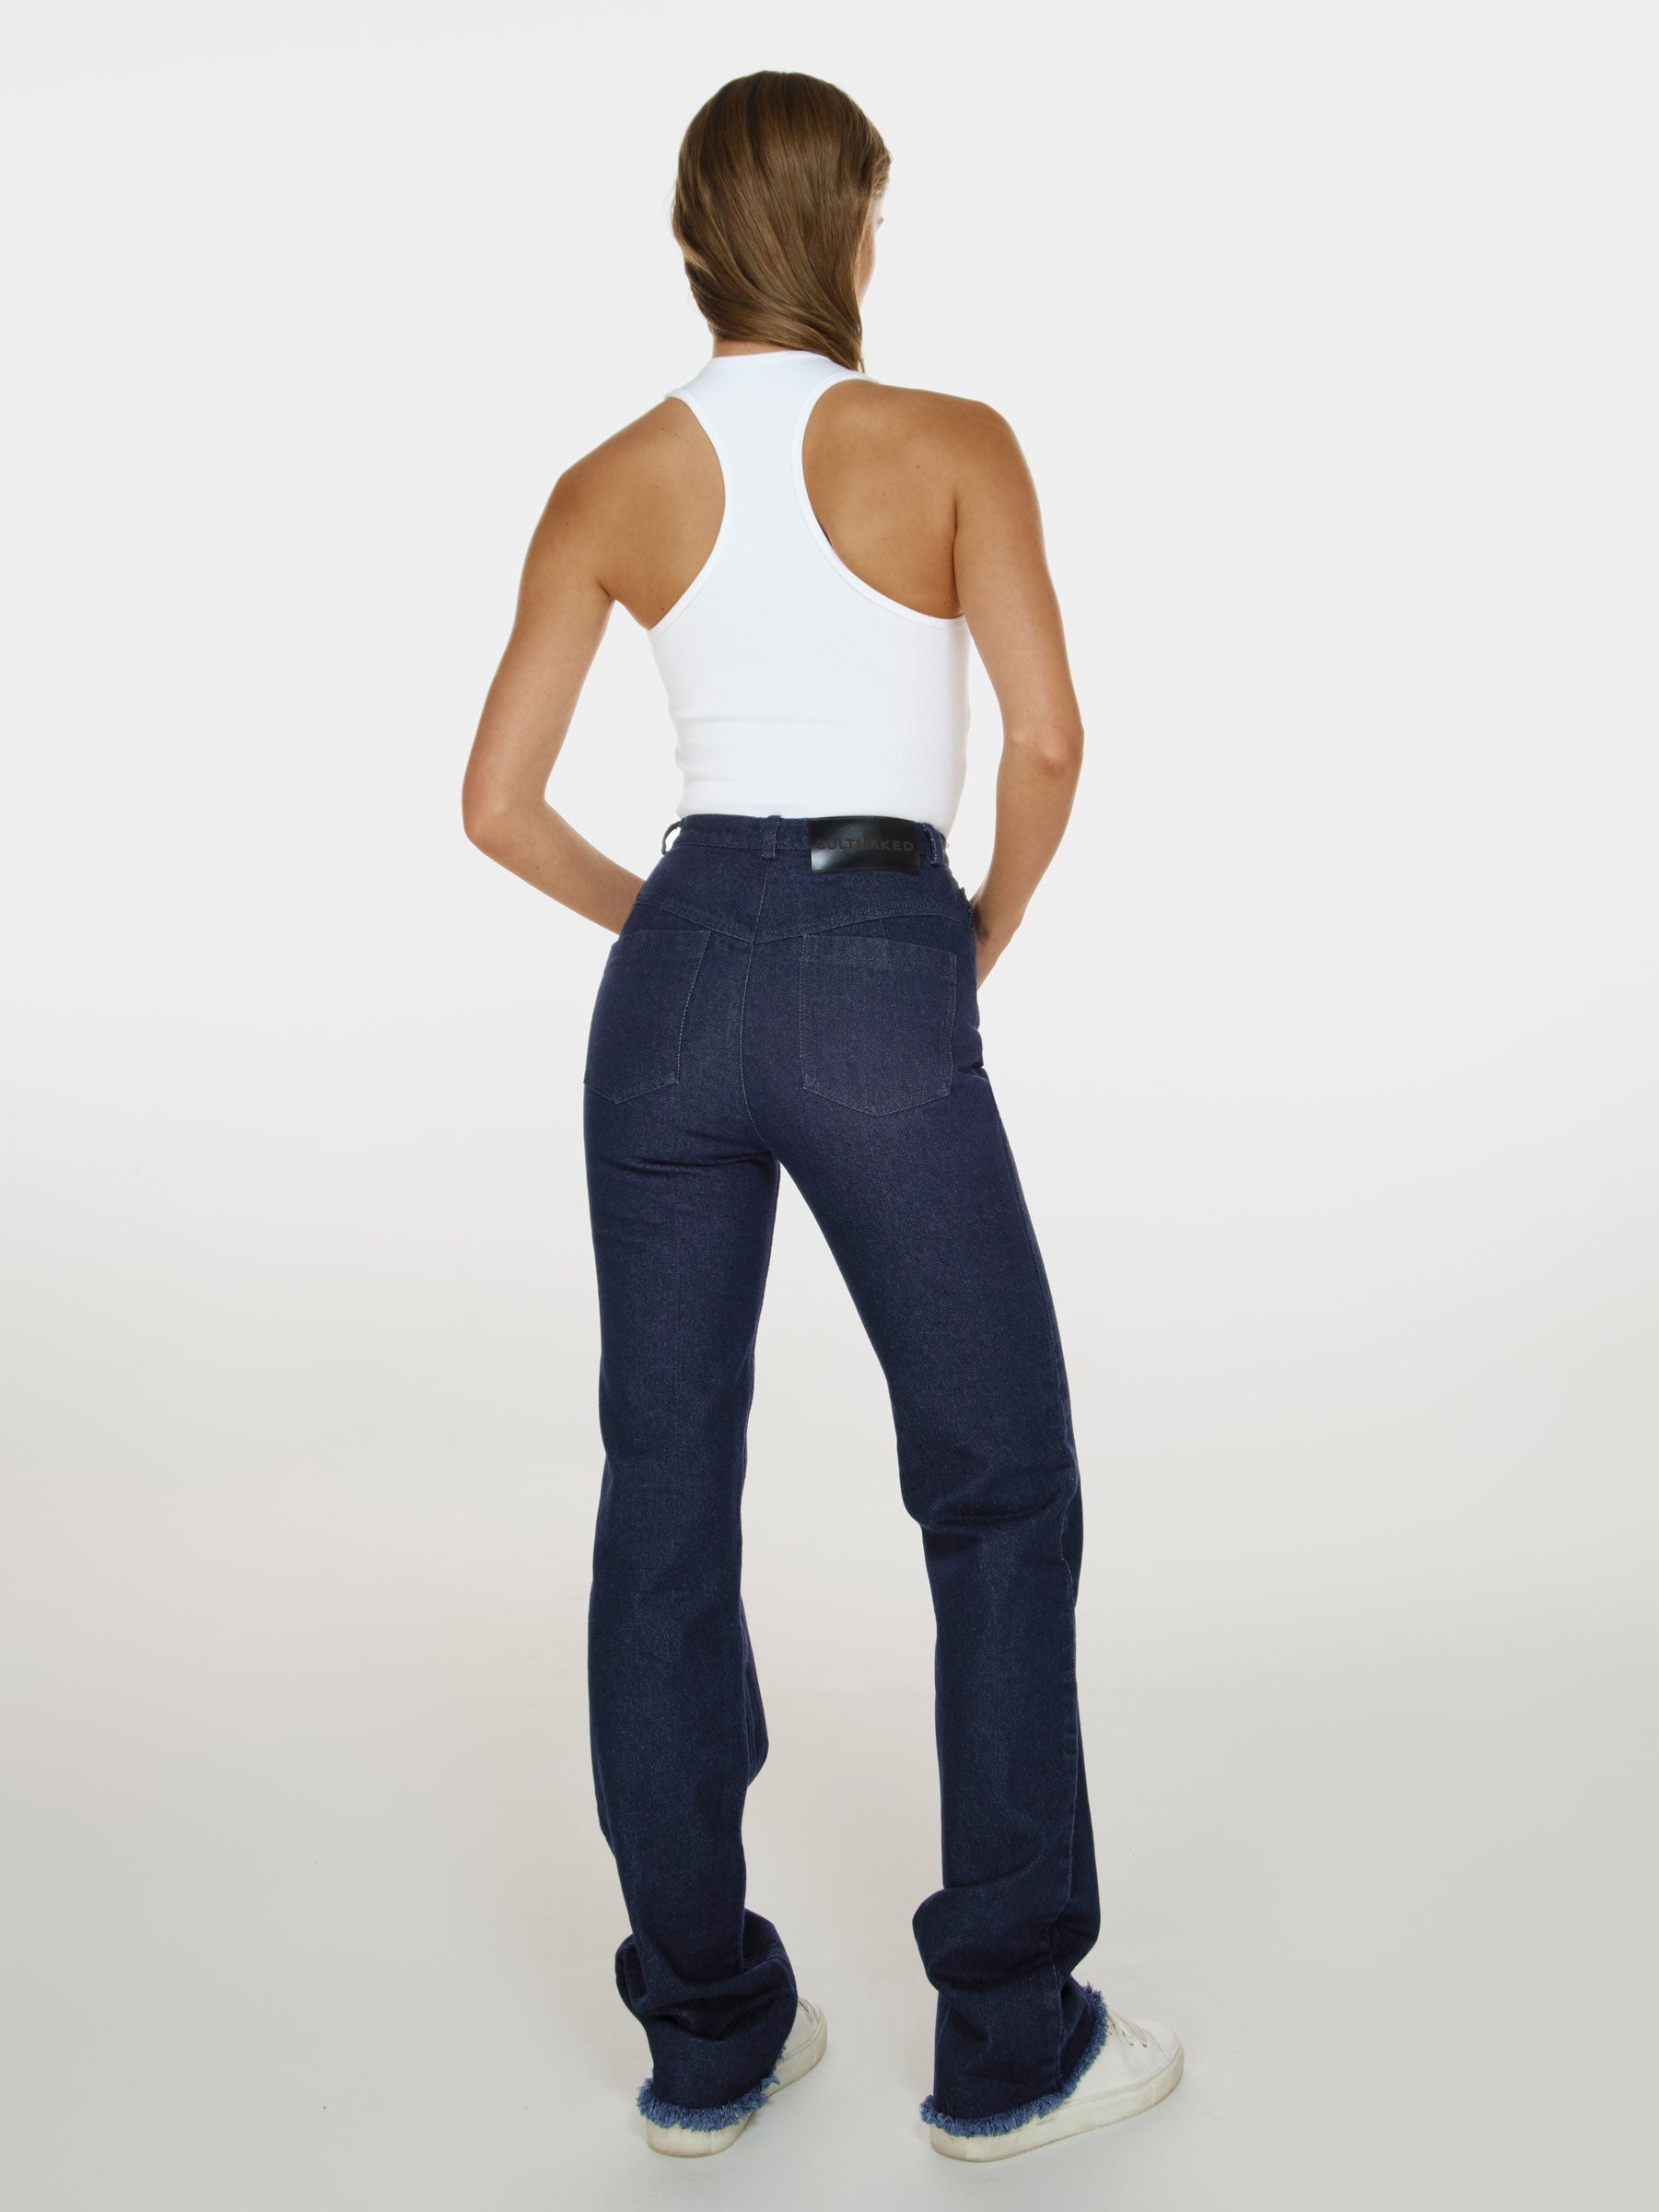 Full shot of a girl facing back in white cotton tank top and blue denim jeans